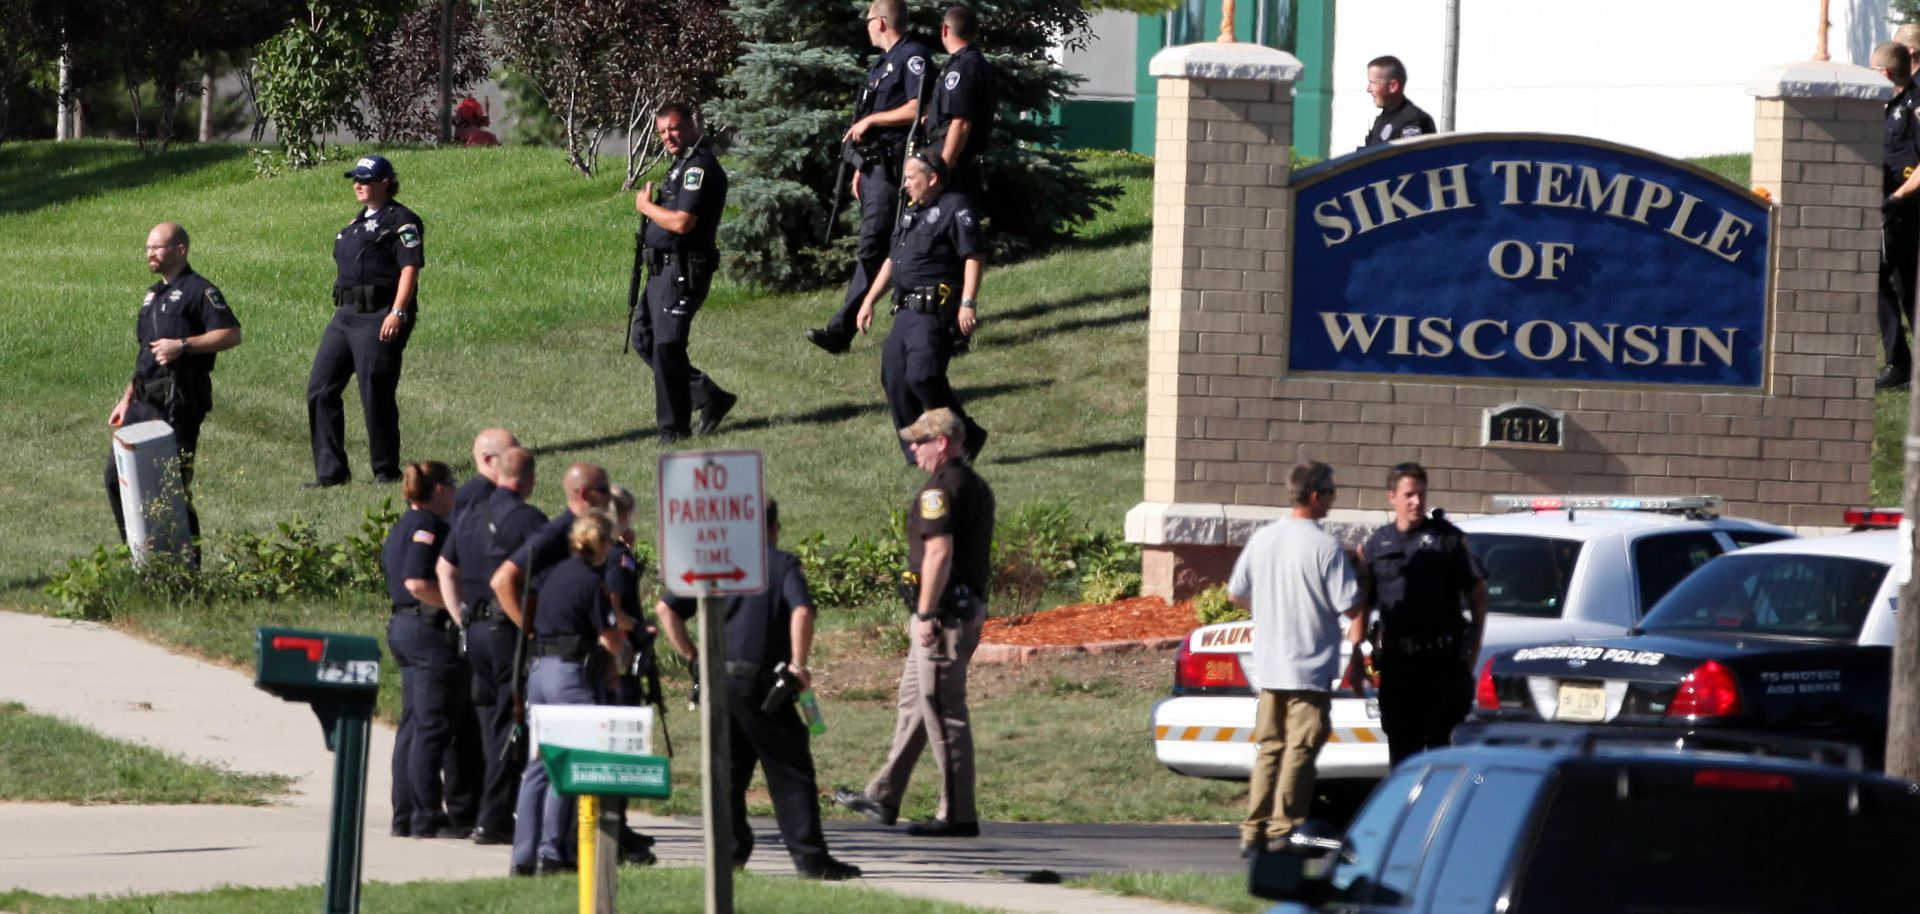 Law enforcement personnel outside the Sikh Temple of Wisconsin after a gunman fired upon people at a service there on Aug. 5, 2012, in Oak Creek, Wisconsin.